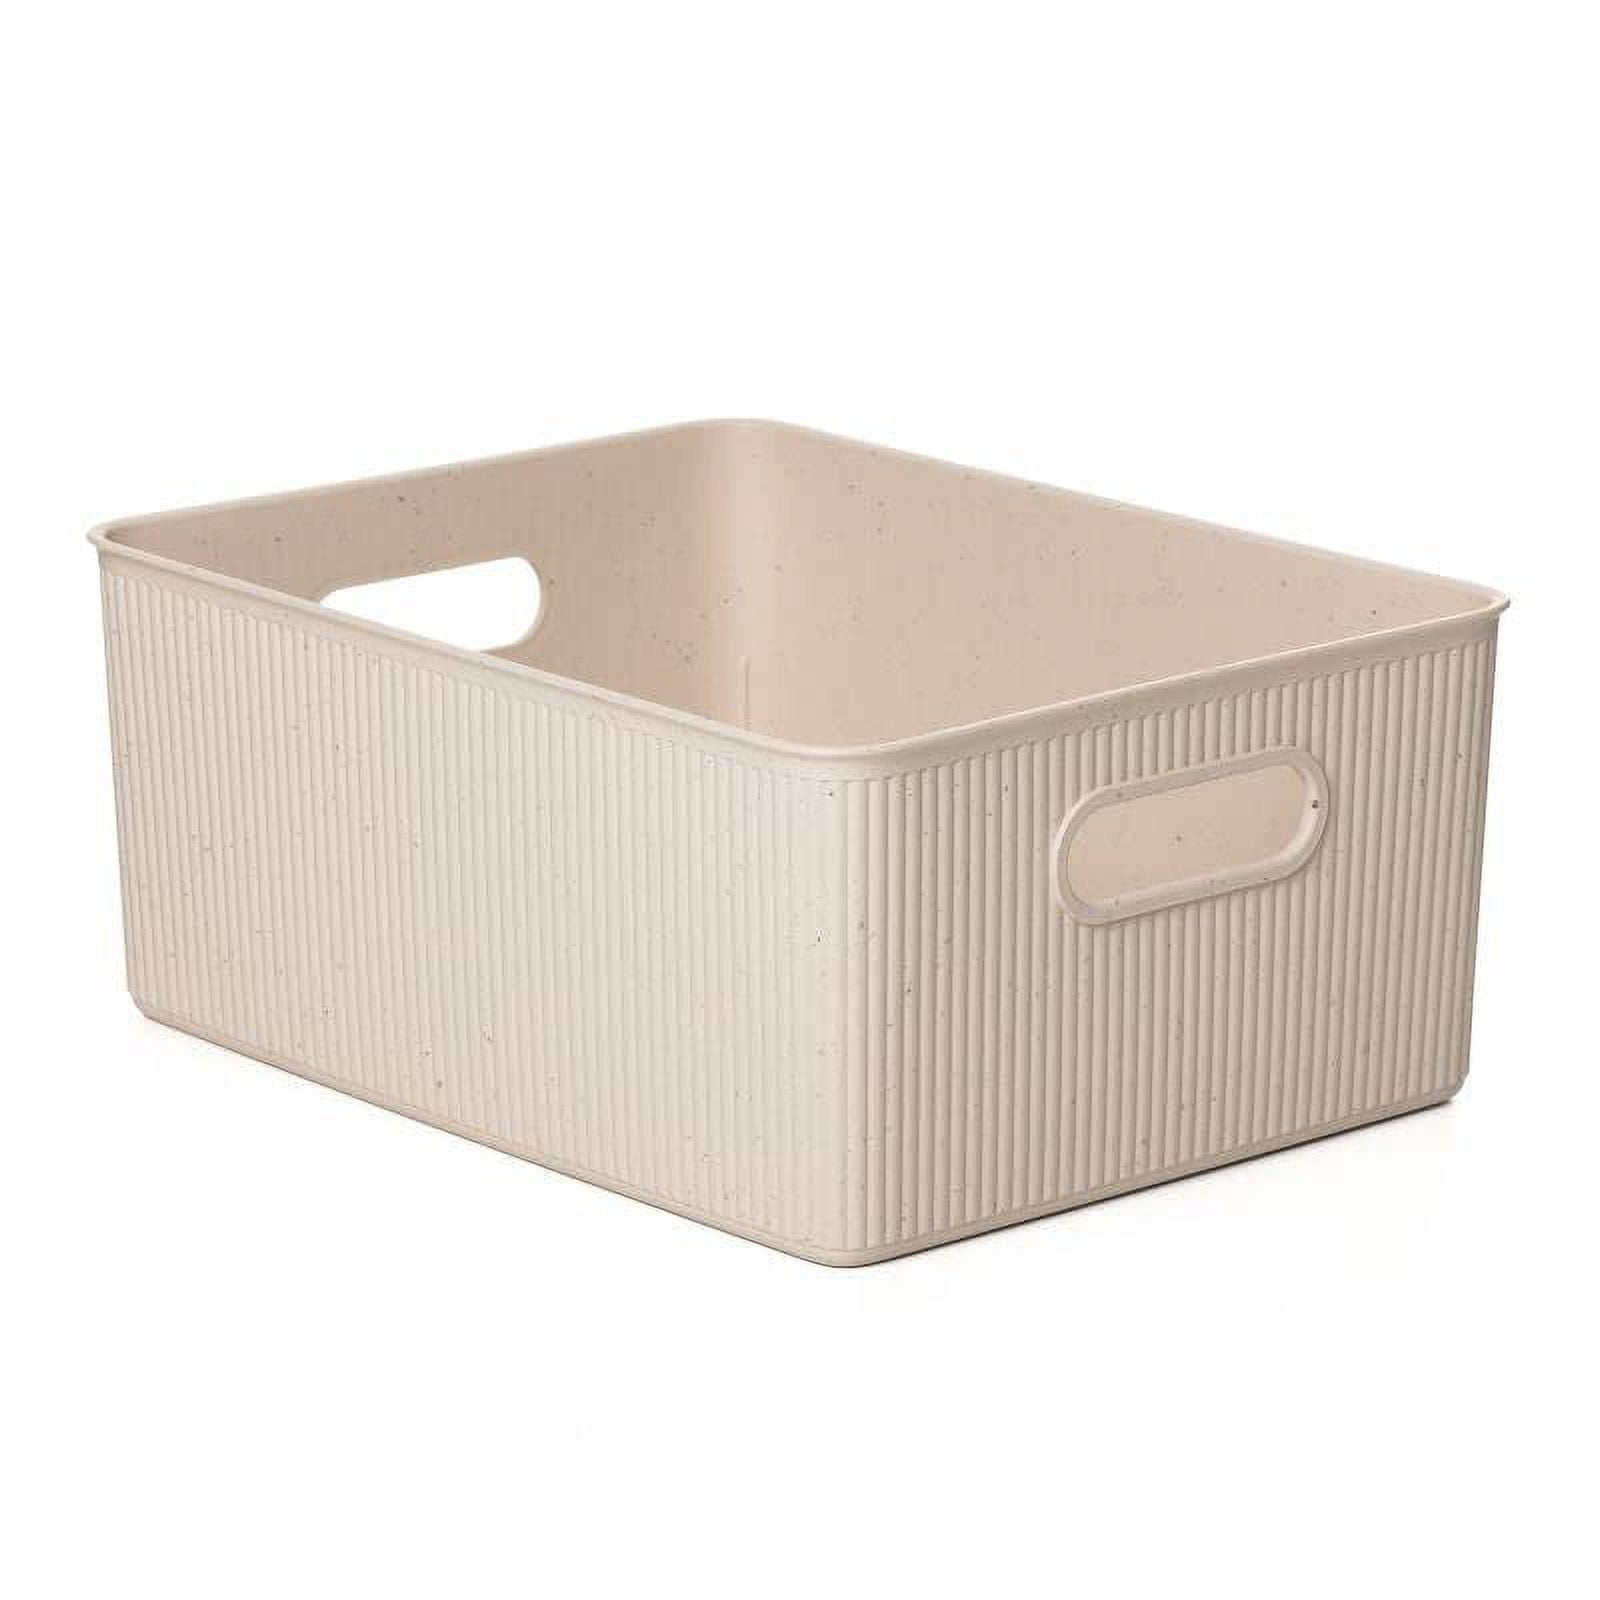 Decorative Plastic Open Home Storage Bins Organizer Baskets, Medium White  (1 Pack) Container Boxes for Organizing Closet Shelves Drawer Shelf -  Ribbed